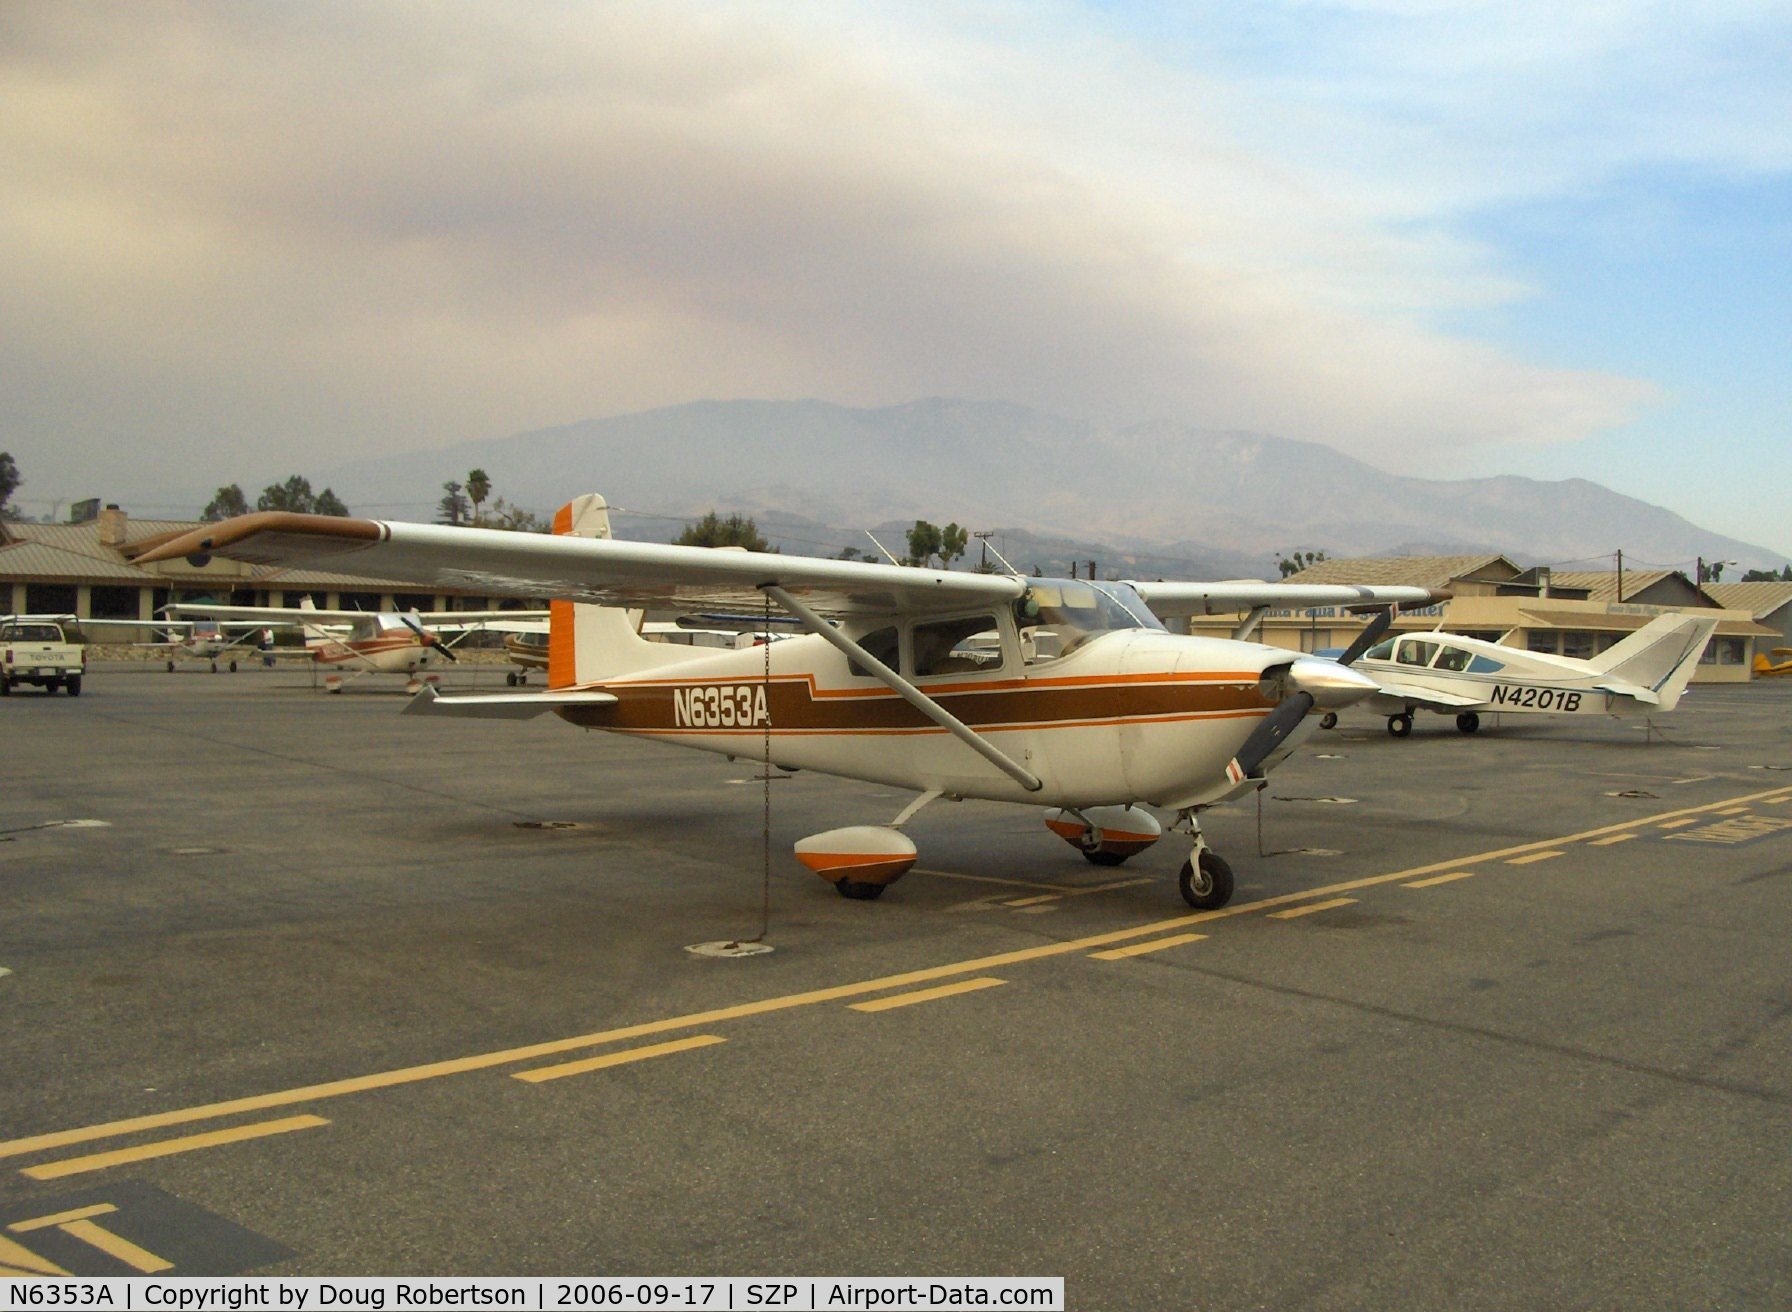 N6353A, 1956 Cessna 182 Skylane C/N 33153, 1956 Cessna 182, Continental O-470-S 230 Hp, Los Padres Mountains fire smoke in background, burning since 4 Sept.